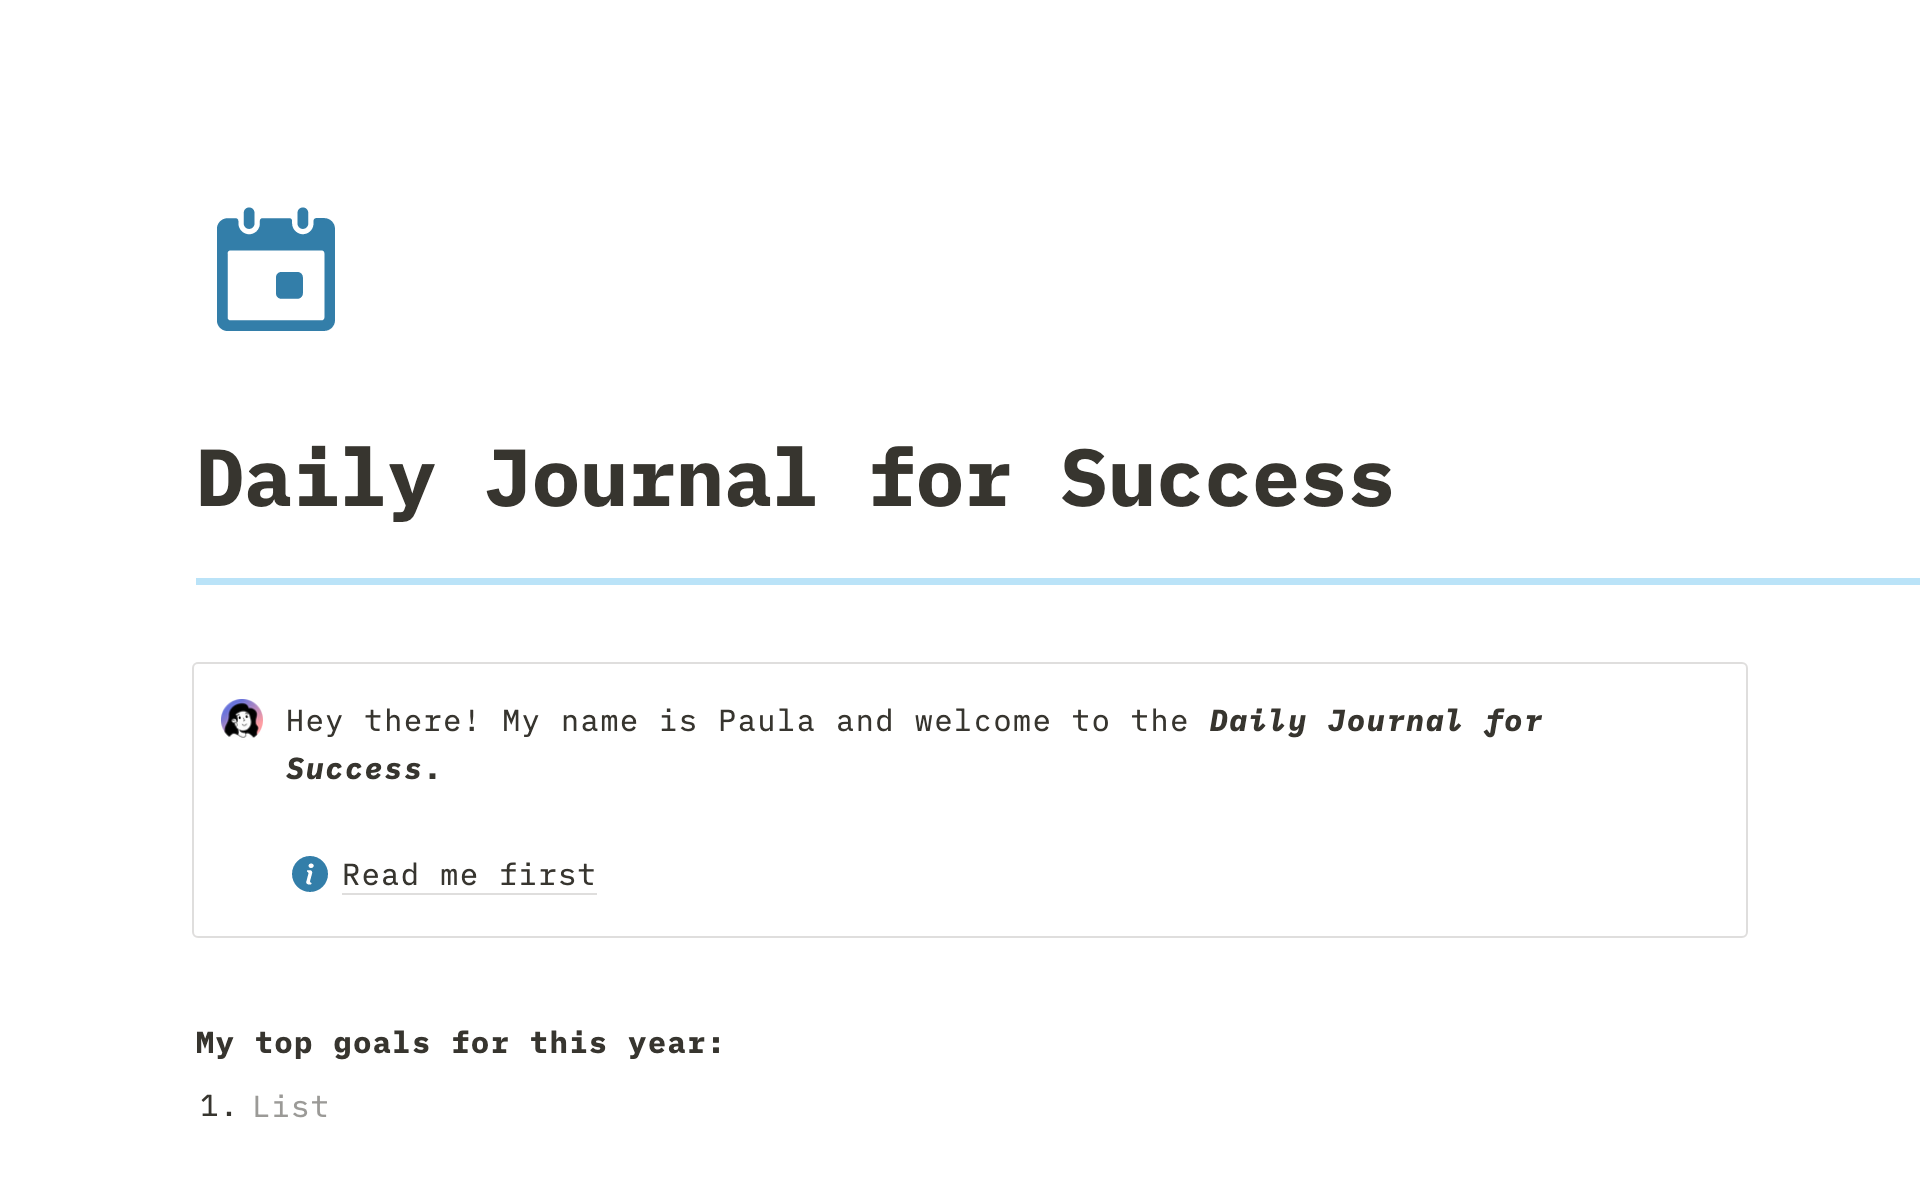 The daily journal for success organizes and improves your life, reduces morning stress, and gives you empowerment and proactive control to lead a life of success every day.